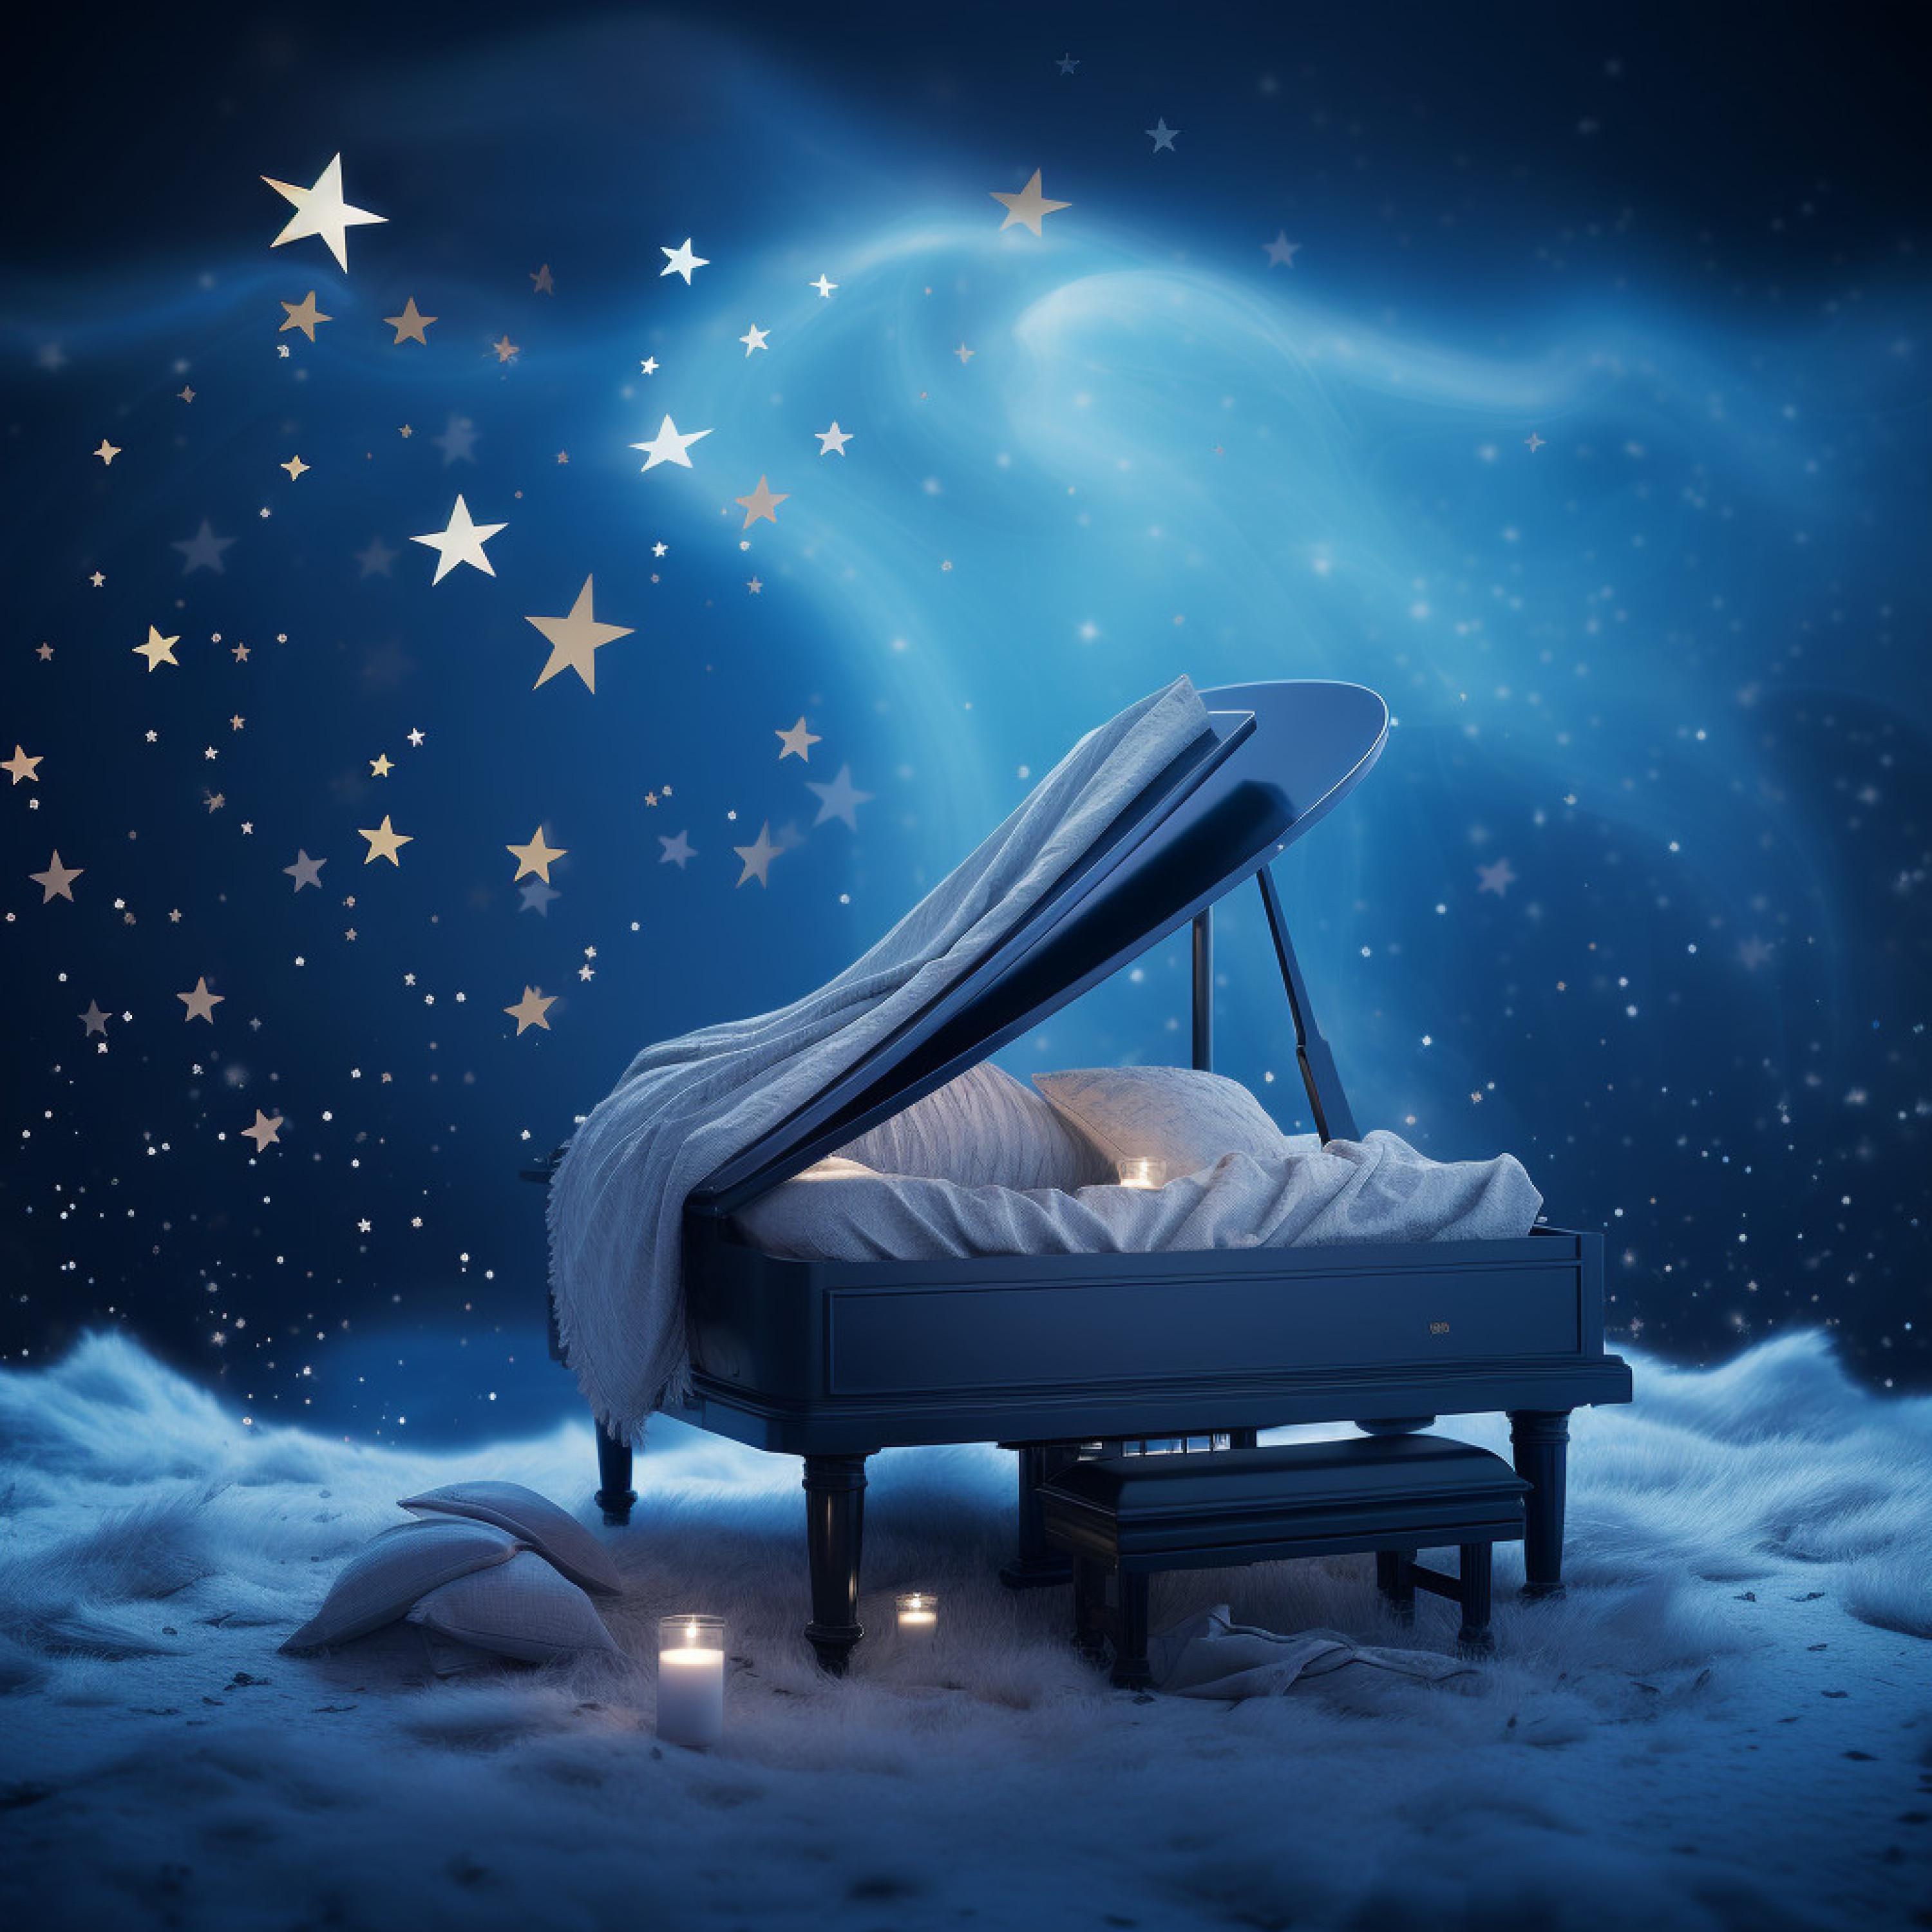 Ultimate Piano Relaxation - Dreams of Sleep Piano